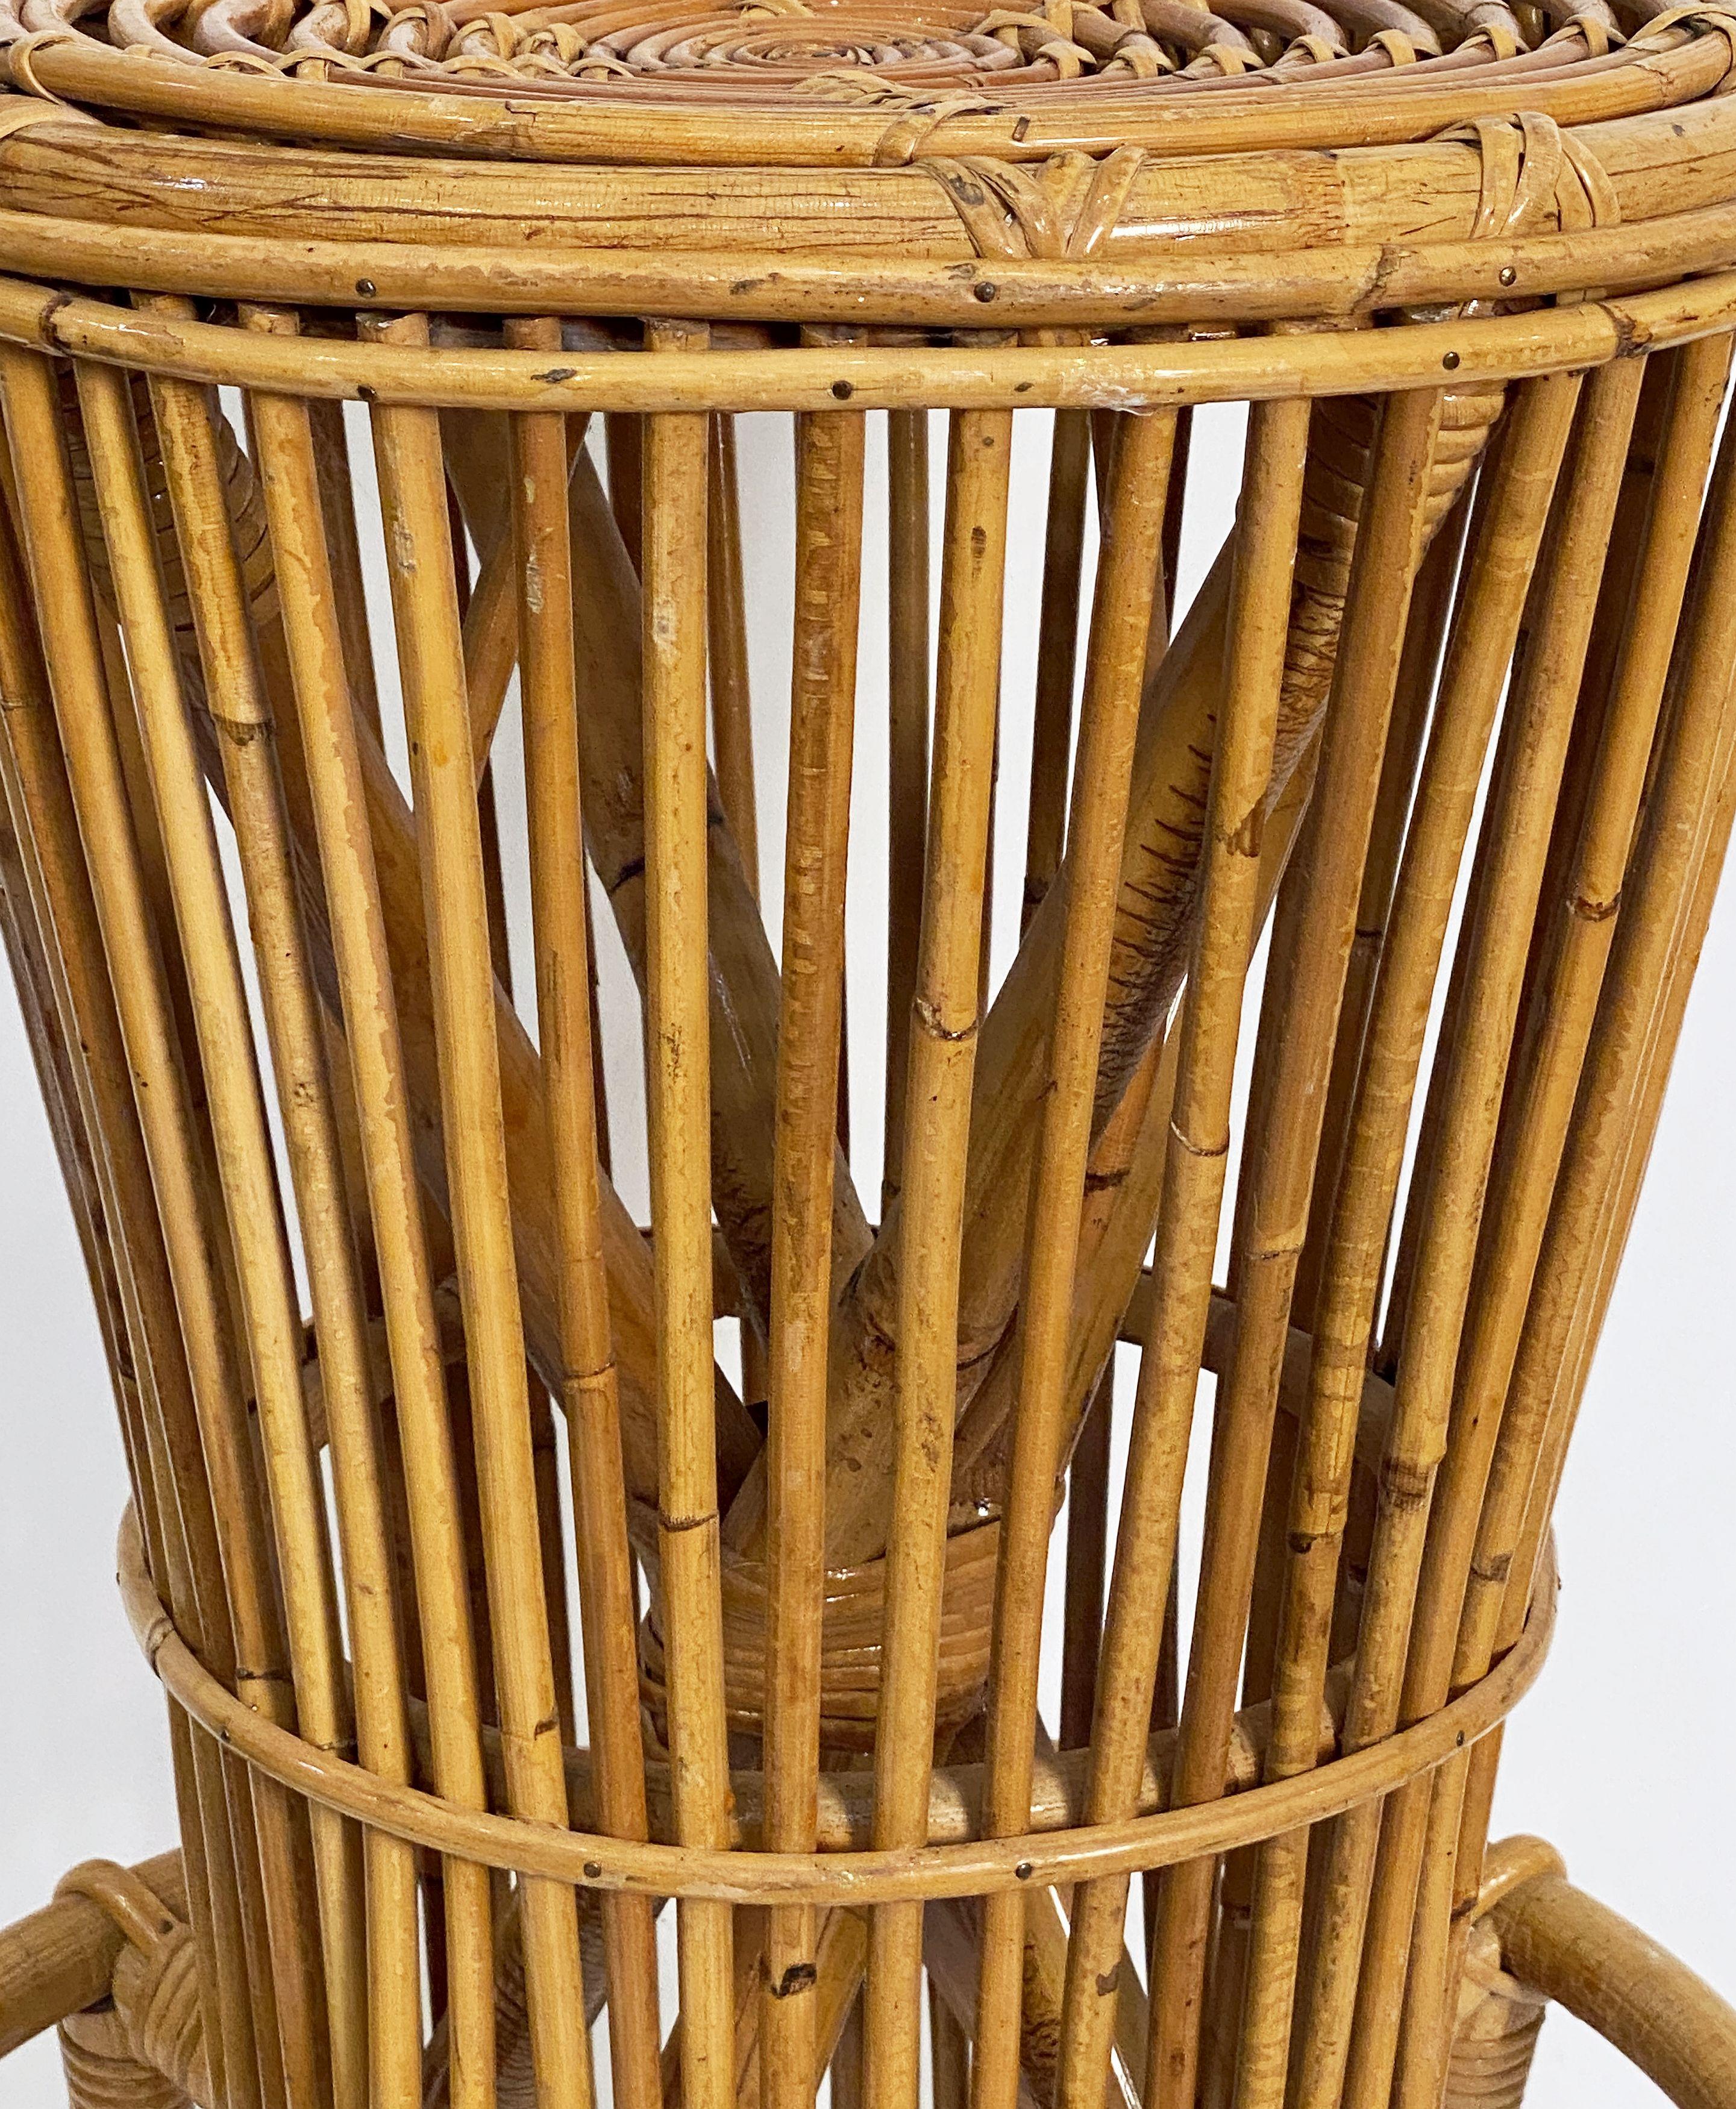 Italian Stool of Rattan and Bamboo from the Mid-20th Century For Sale 10